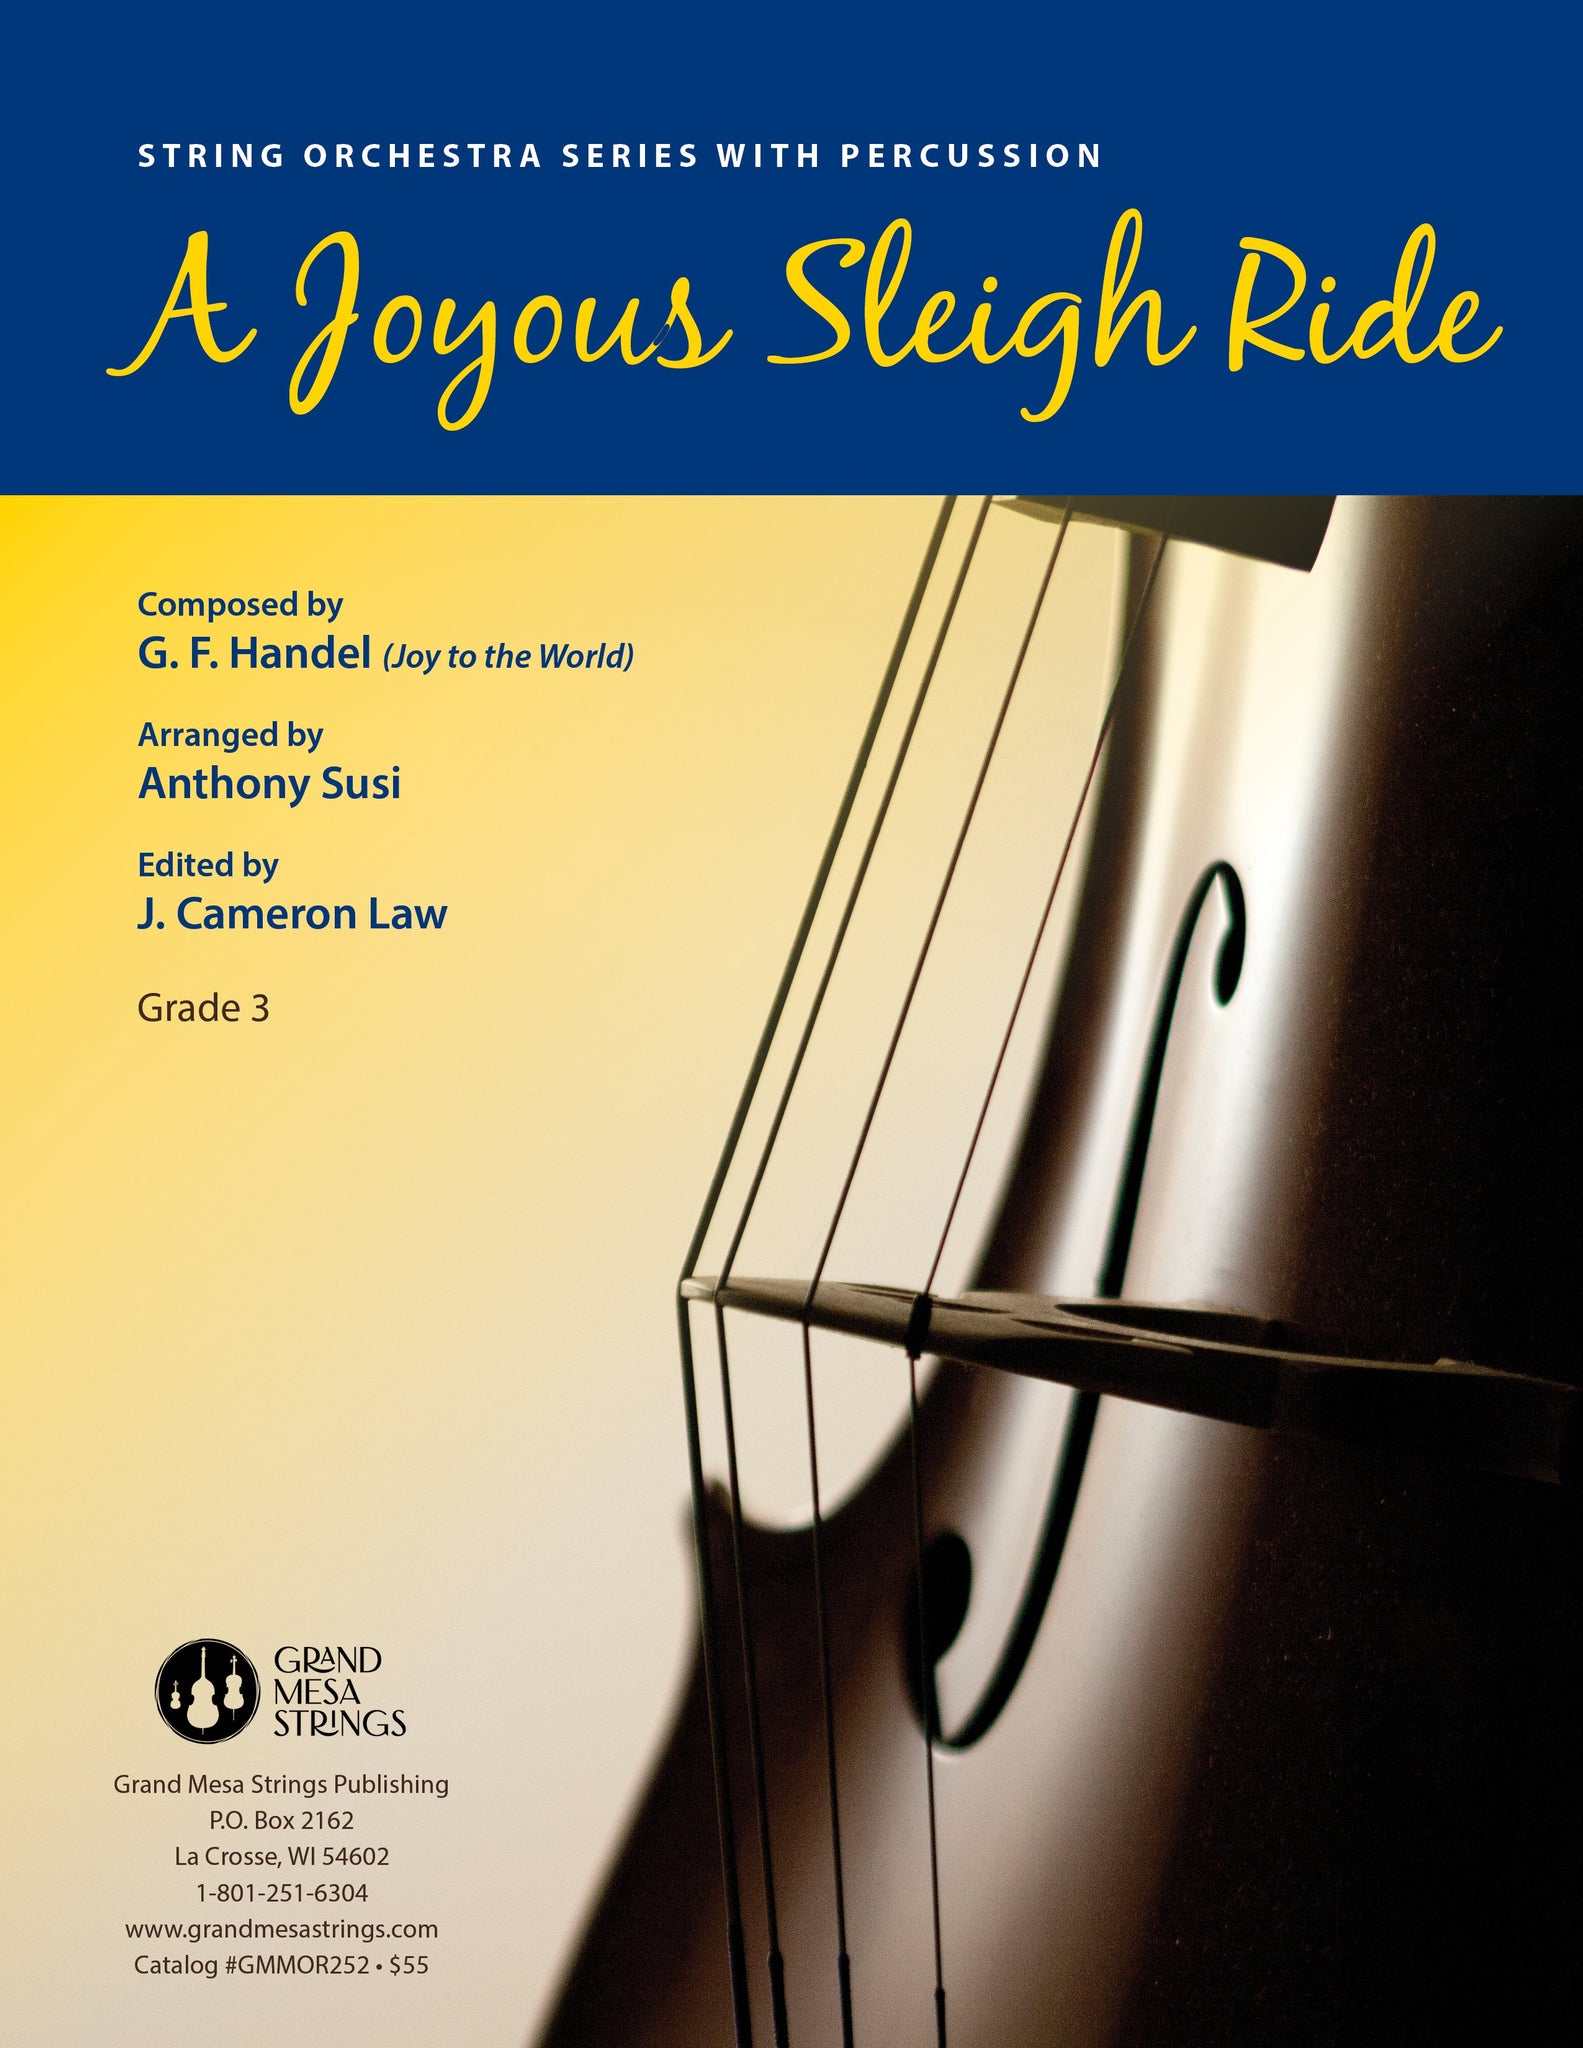 Strings sheet music cover of A Joyous Sleigh Ride, arranged by Anthony Susi.